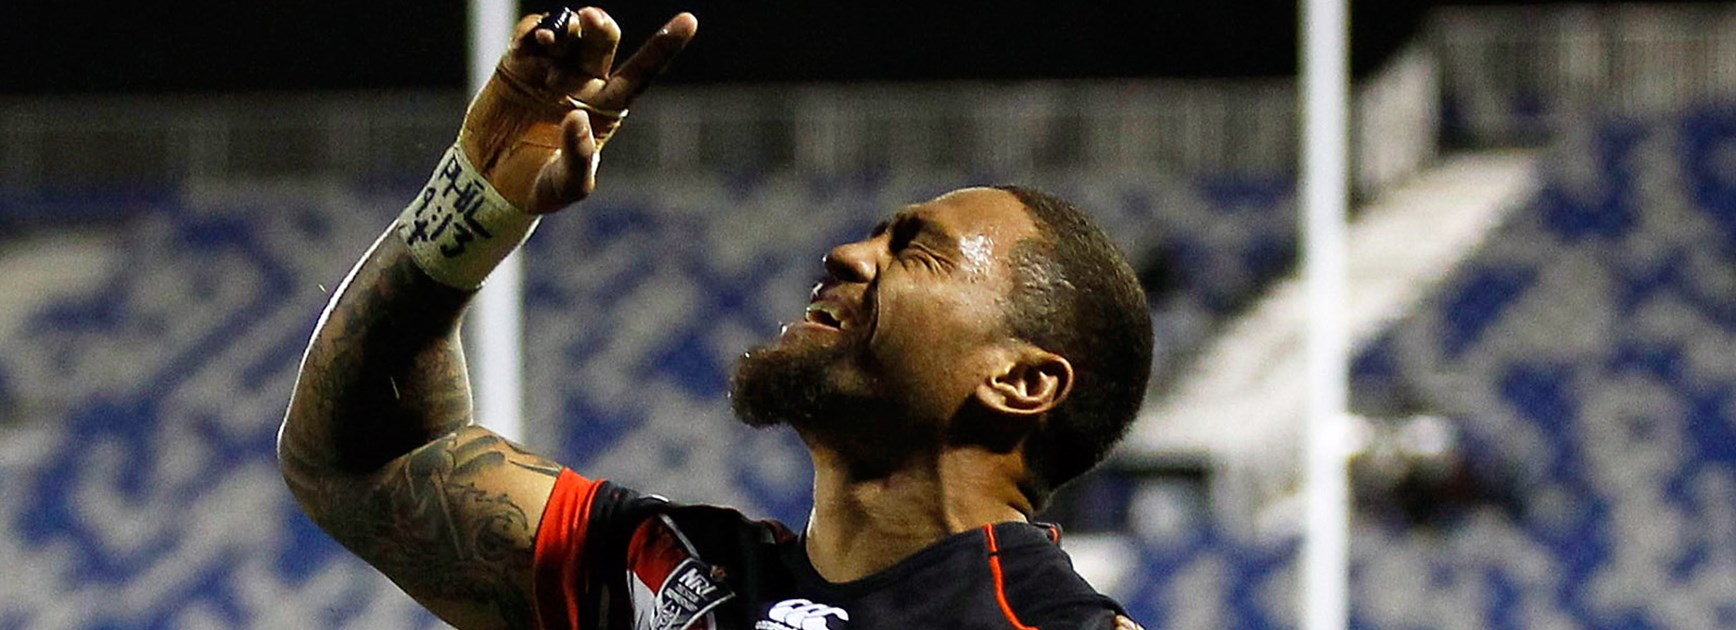 Warriors winger Manu Vatuvei continues to break records in his 11th season in the NRL.